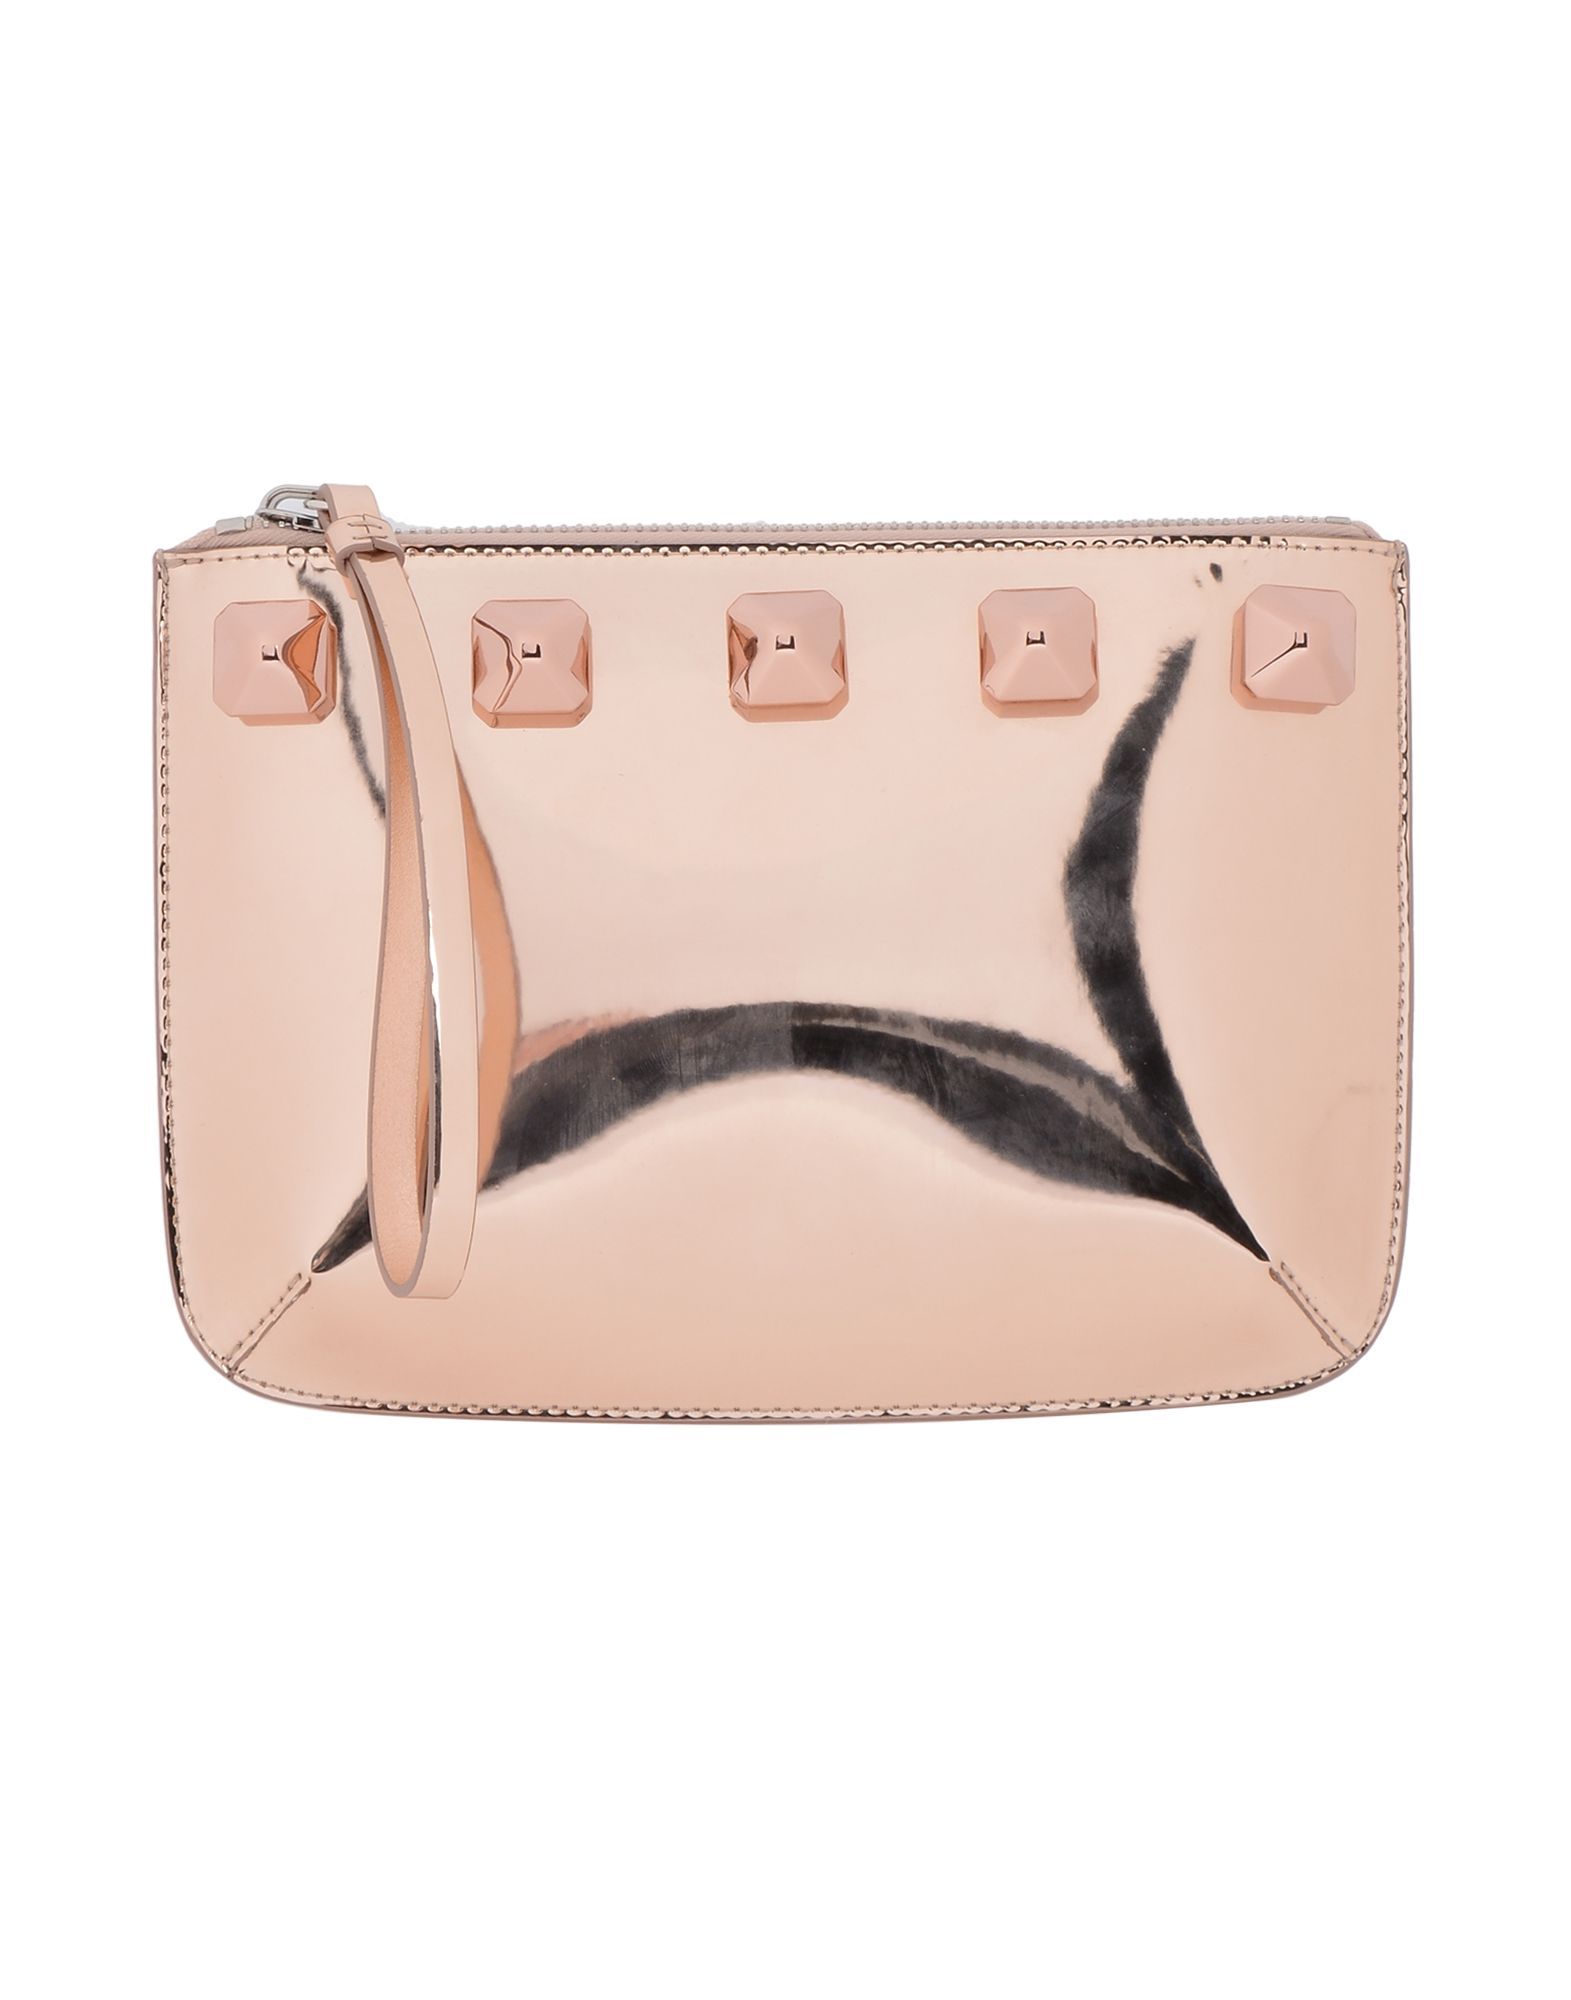 Laminated effect<br>Studs<br>Solid colour<br>Zip<br>Internal pockets<br>Fully lined<br>Medium<br>Contains non-textile parts of animal origin<br>Clutch<br>